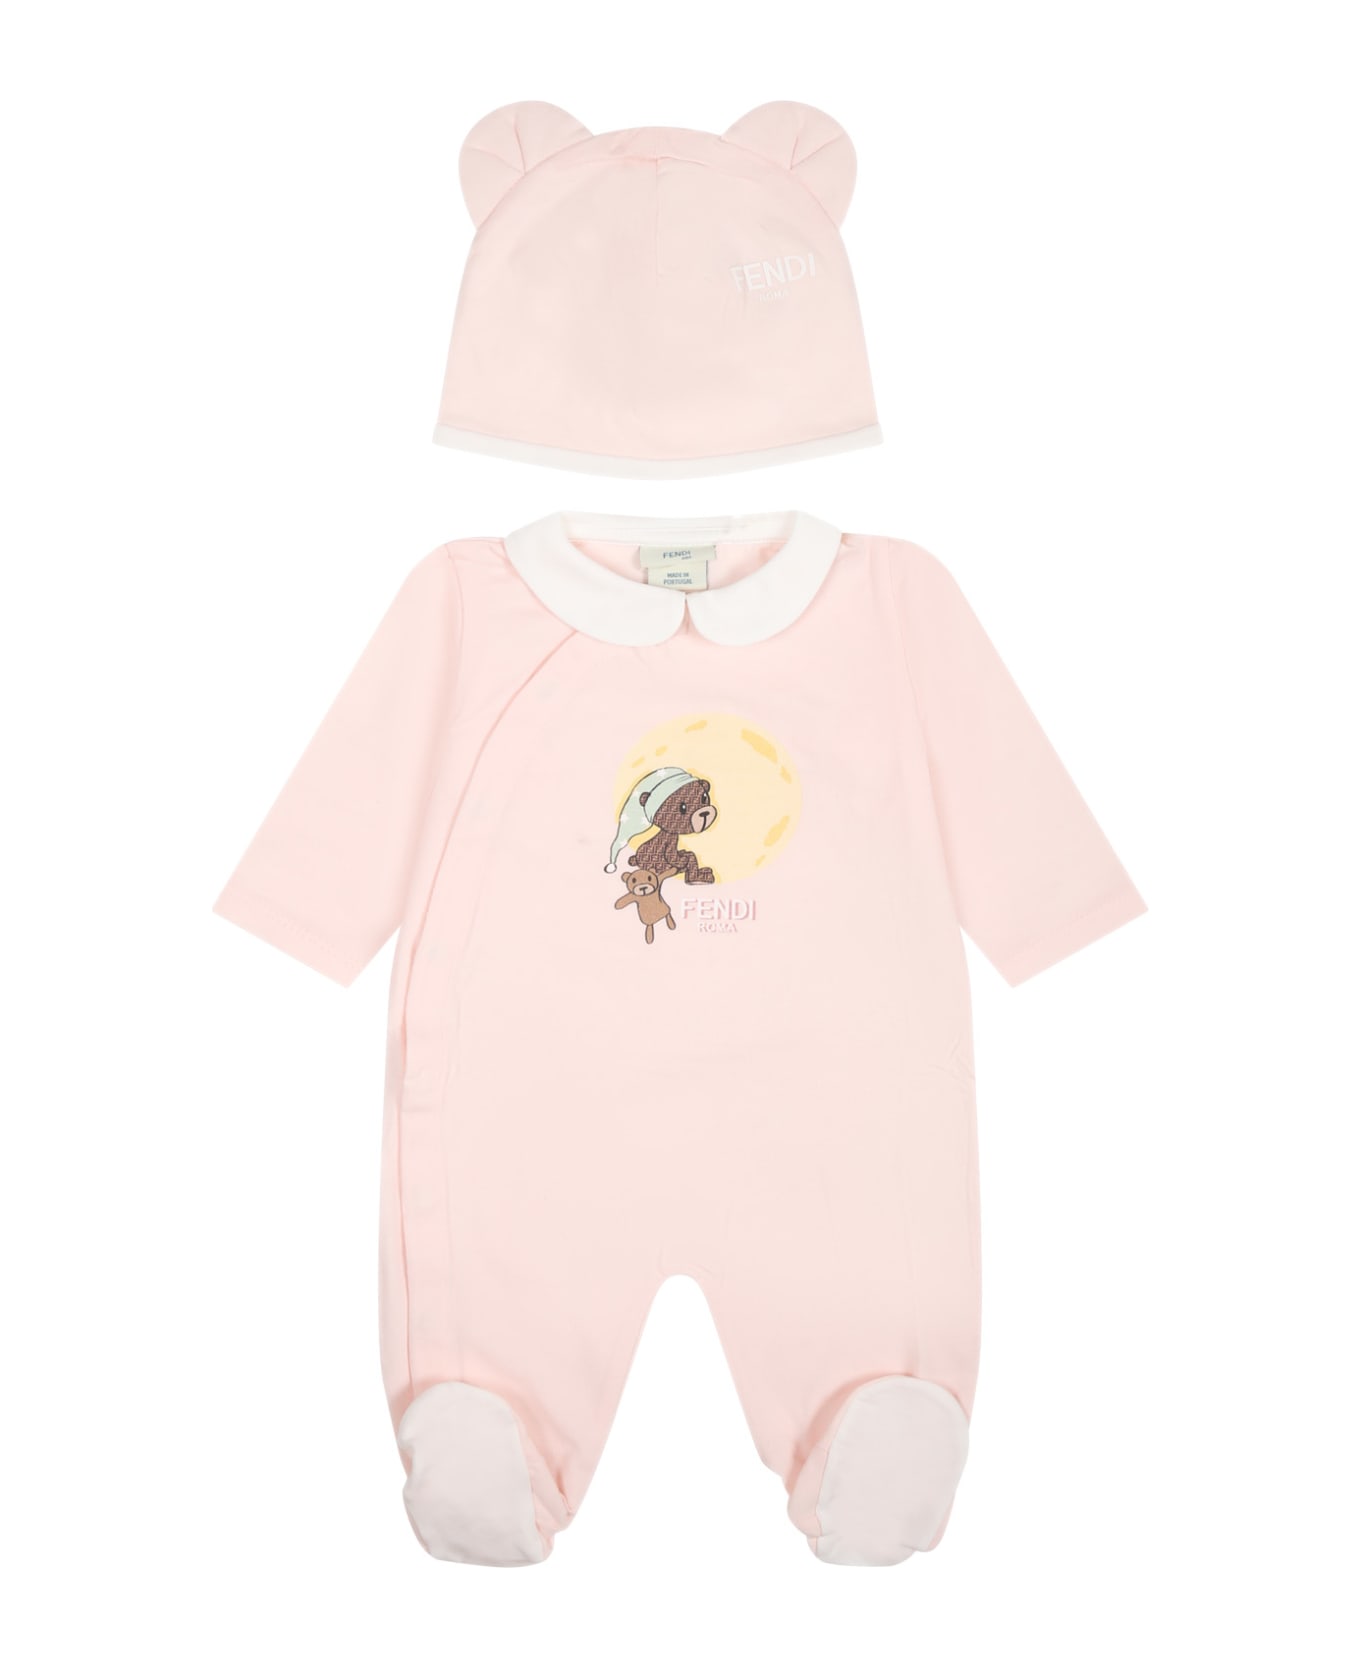 Fendi obcasie Pink Set For Baby Girl With Fendi obcasie Bear - Pink